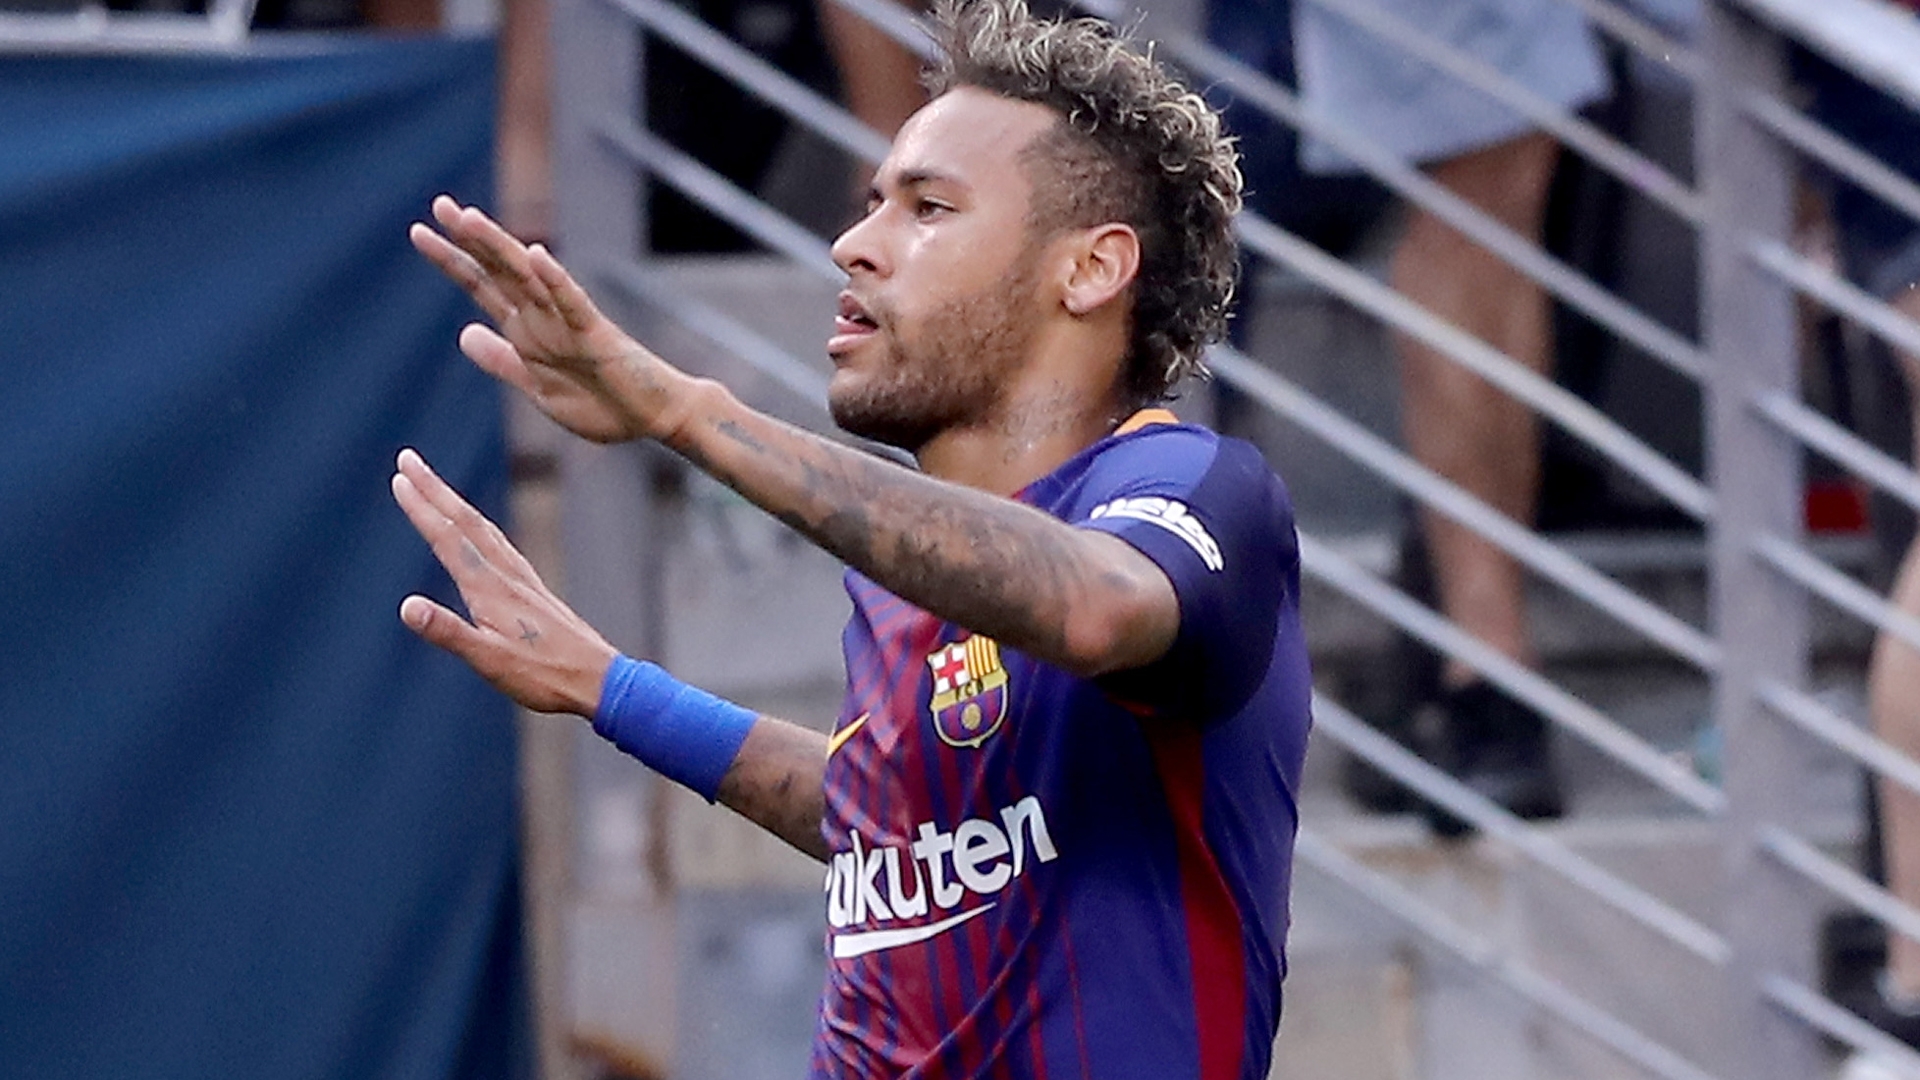 Barcelona's president Josep Maria Bartomeu says that there is no way Neymar is leaving the club unless PSG will decide to pay the €222million release clause